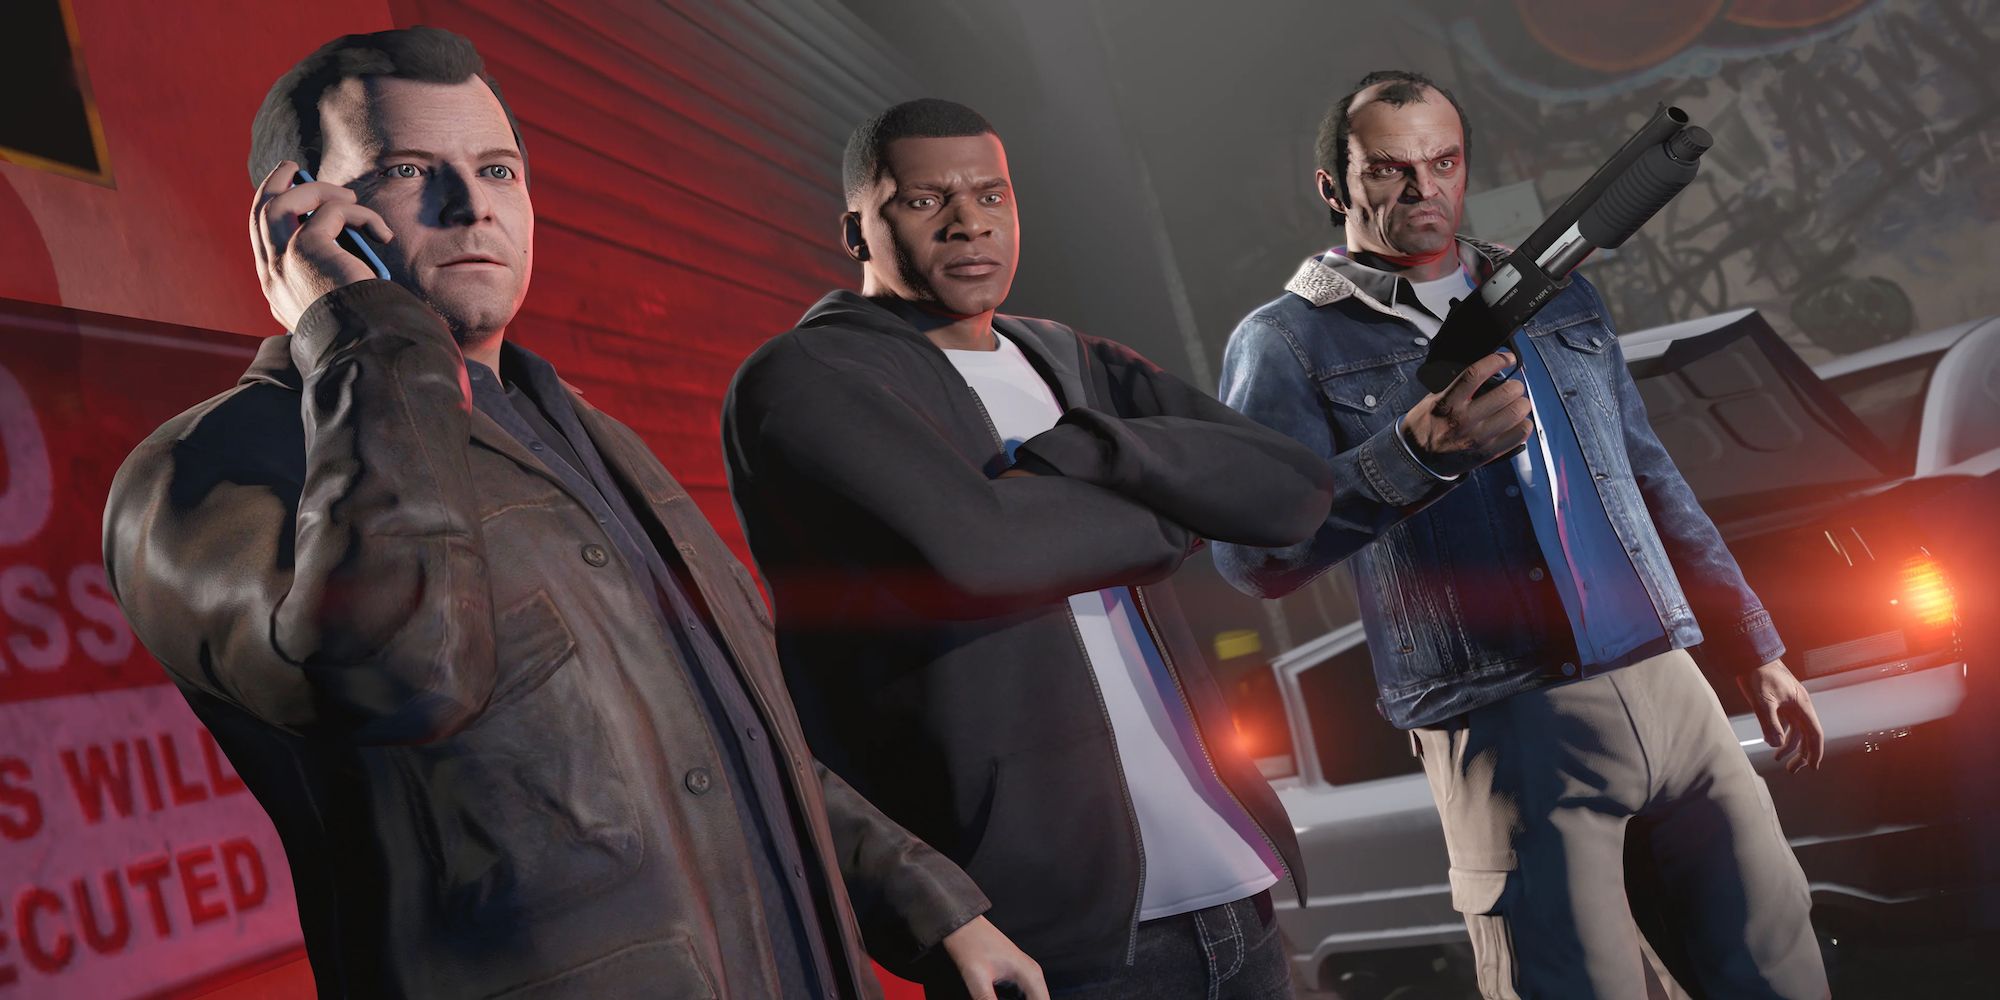 Michael, Franklin, and Trent all together (Grand Theft Auto 5)